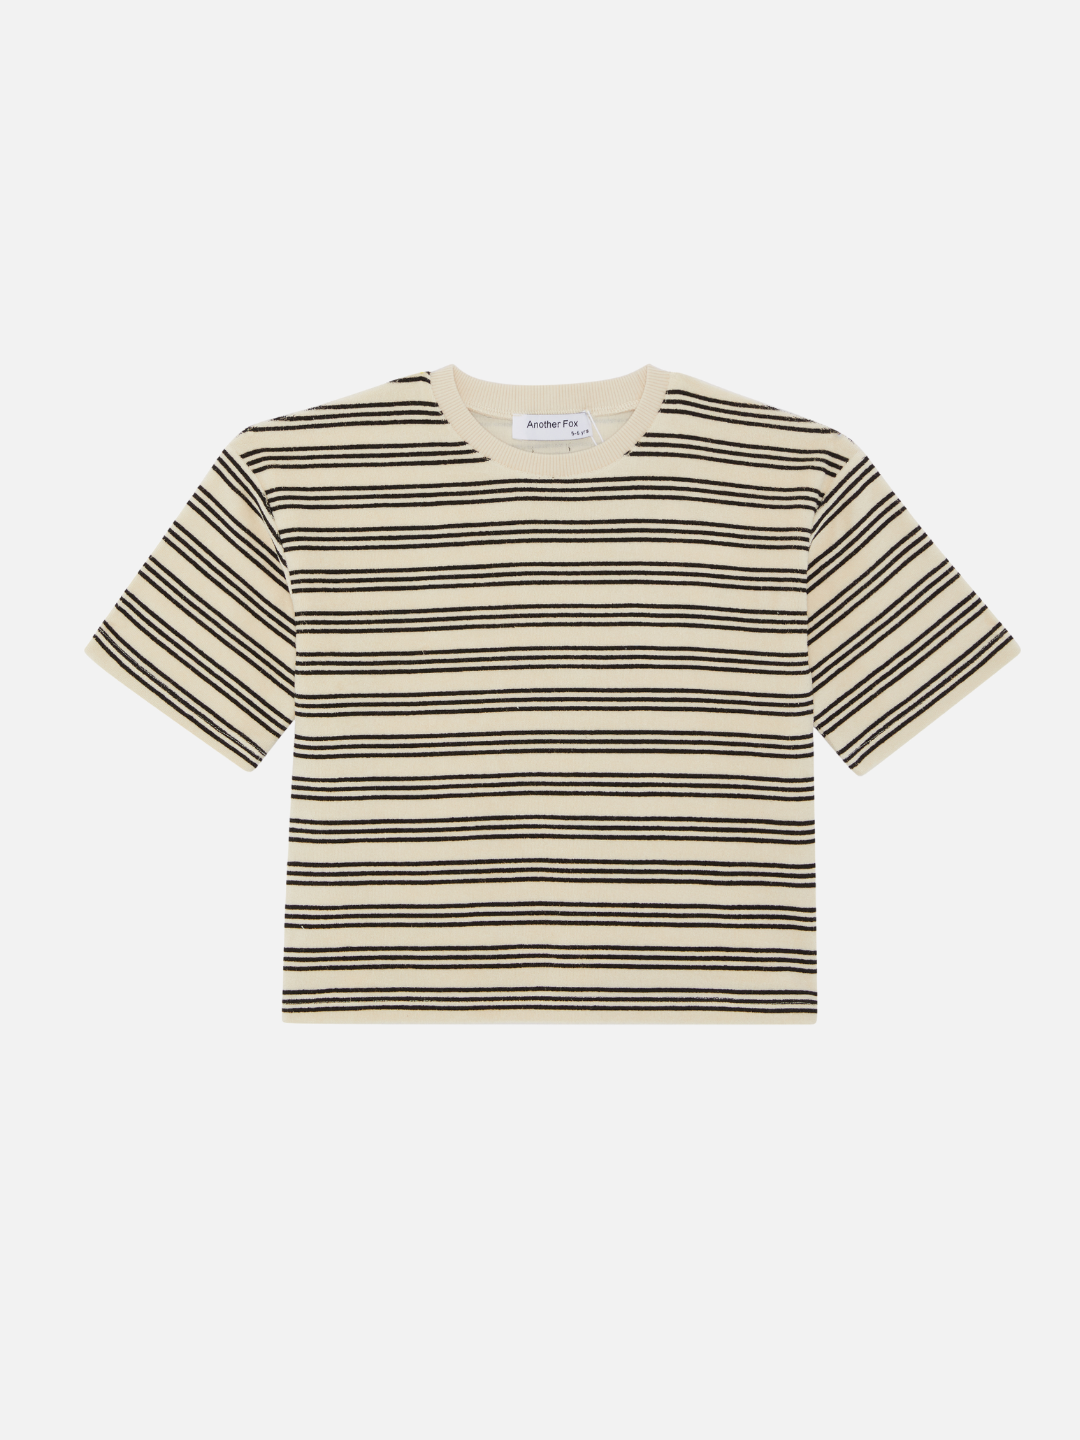 A front view of the kid's tee in stripe print